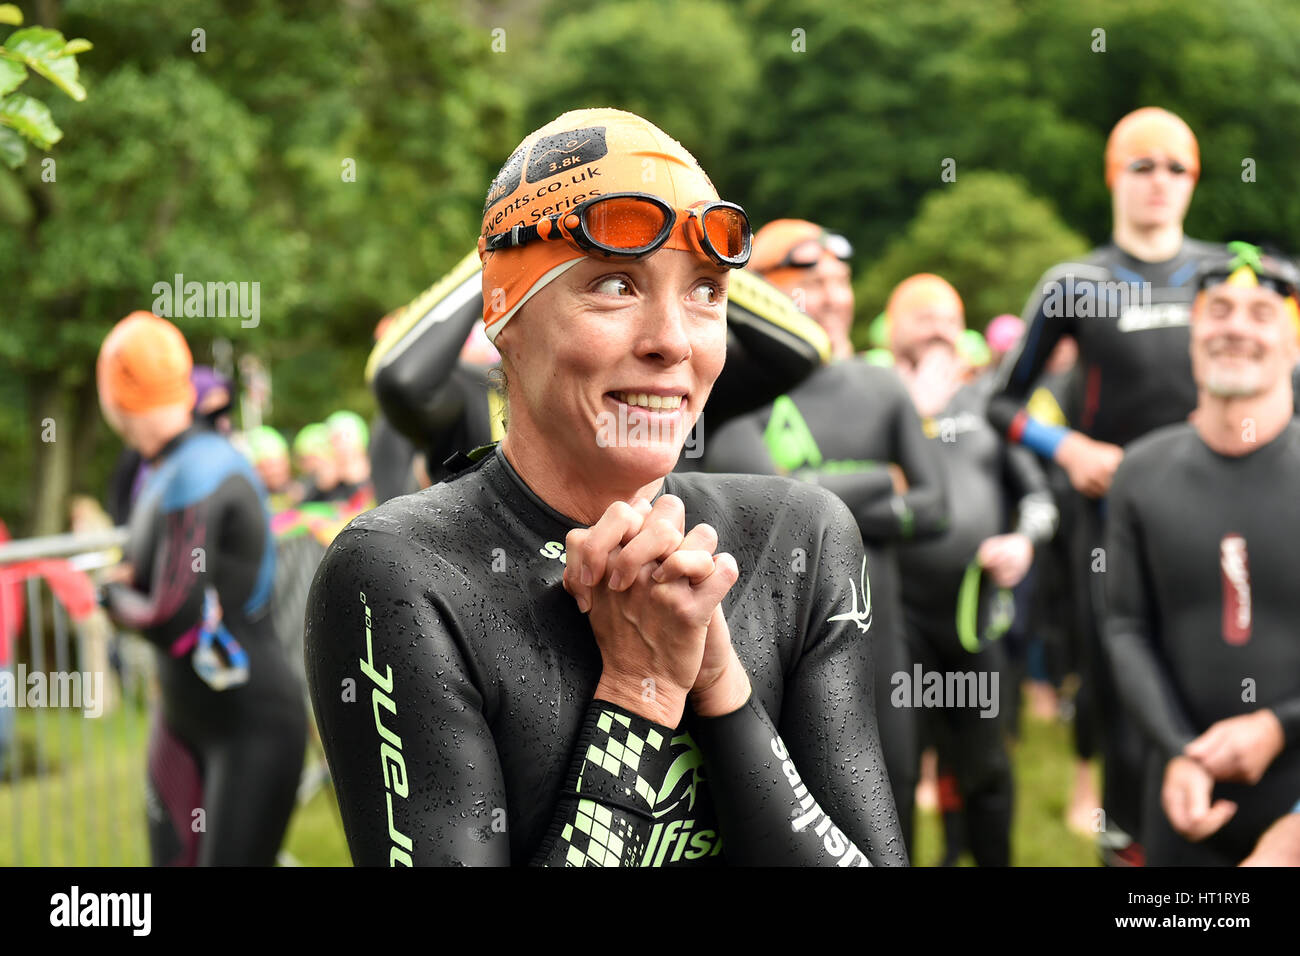 A woman looks nervous before her swim at an Open Water Swimming Event  Ullswater lake, Cumbria UK Stock Photo